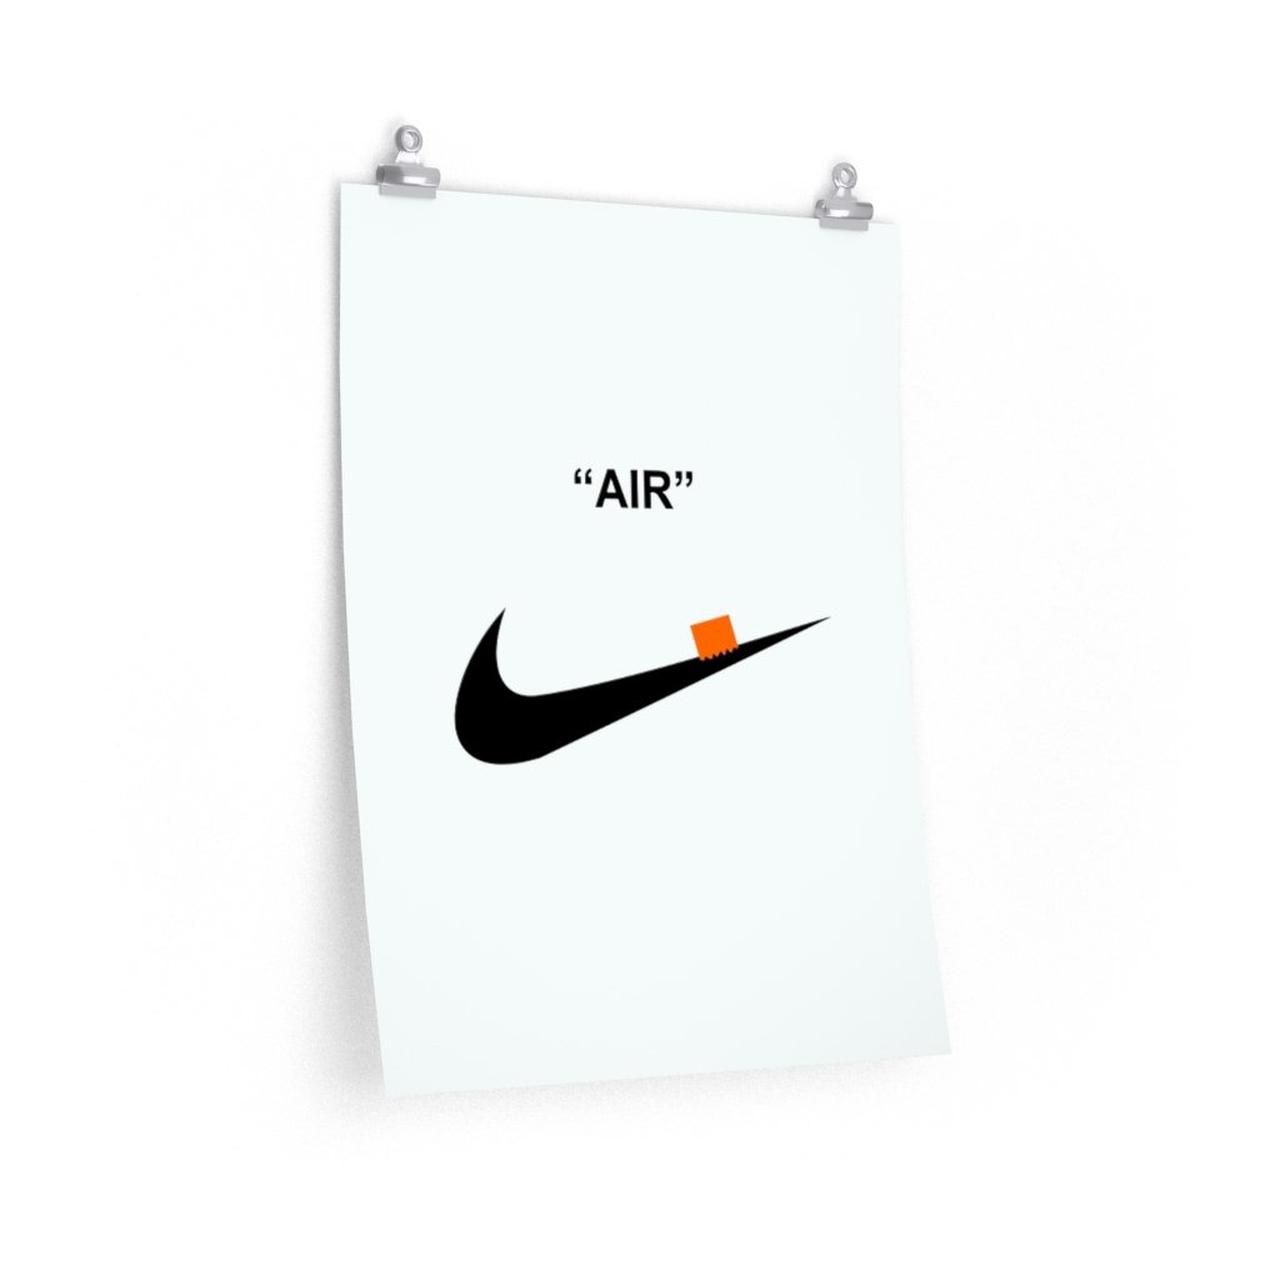 Nike “AIR” Poster Inspired by the world-famous... - Depop